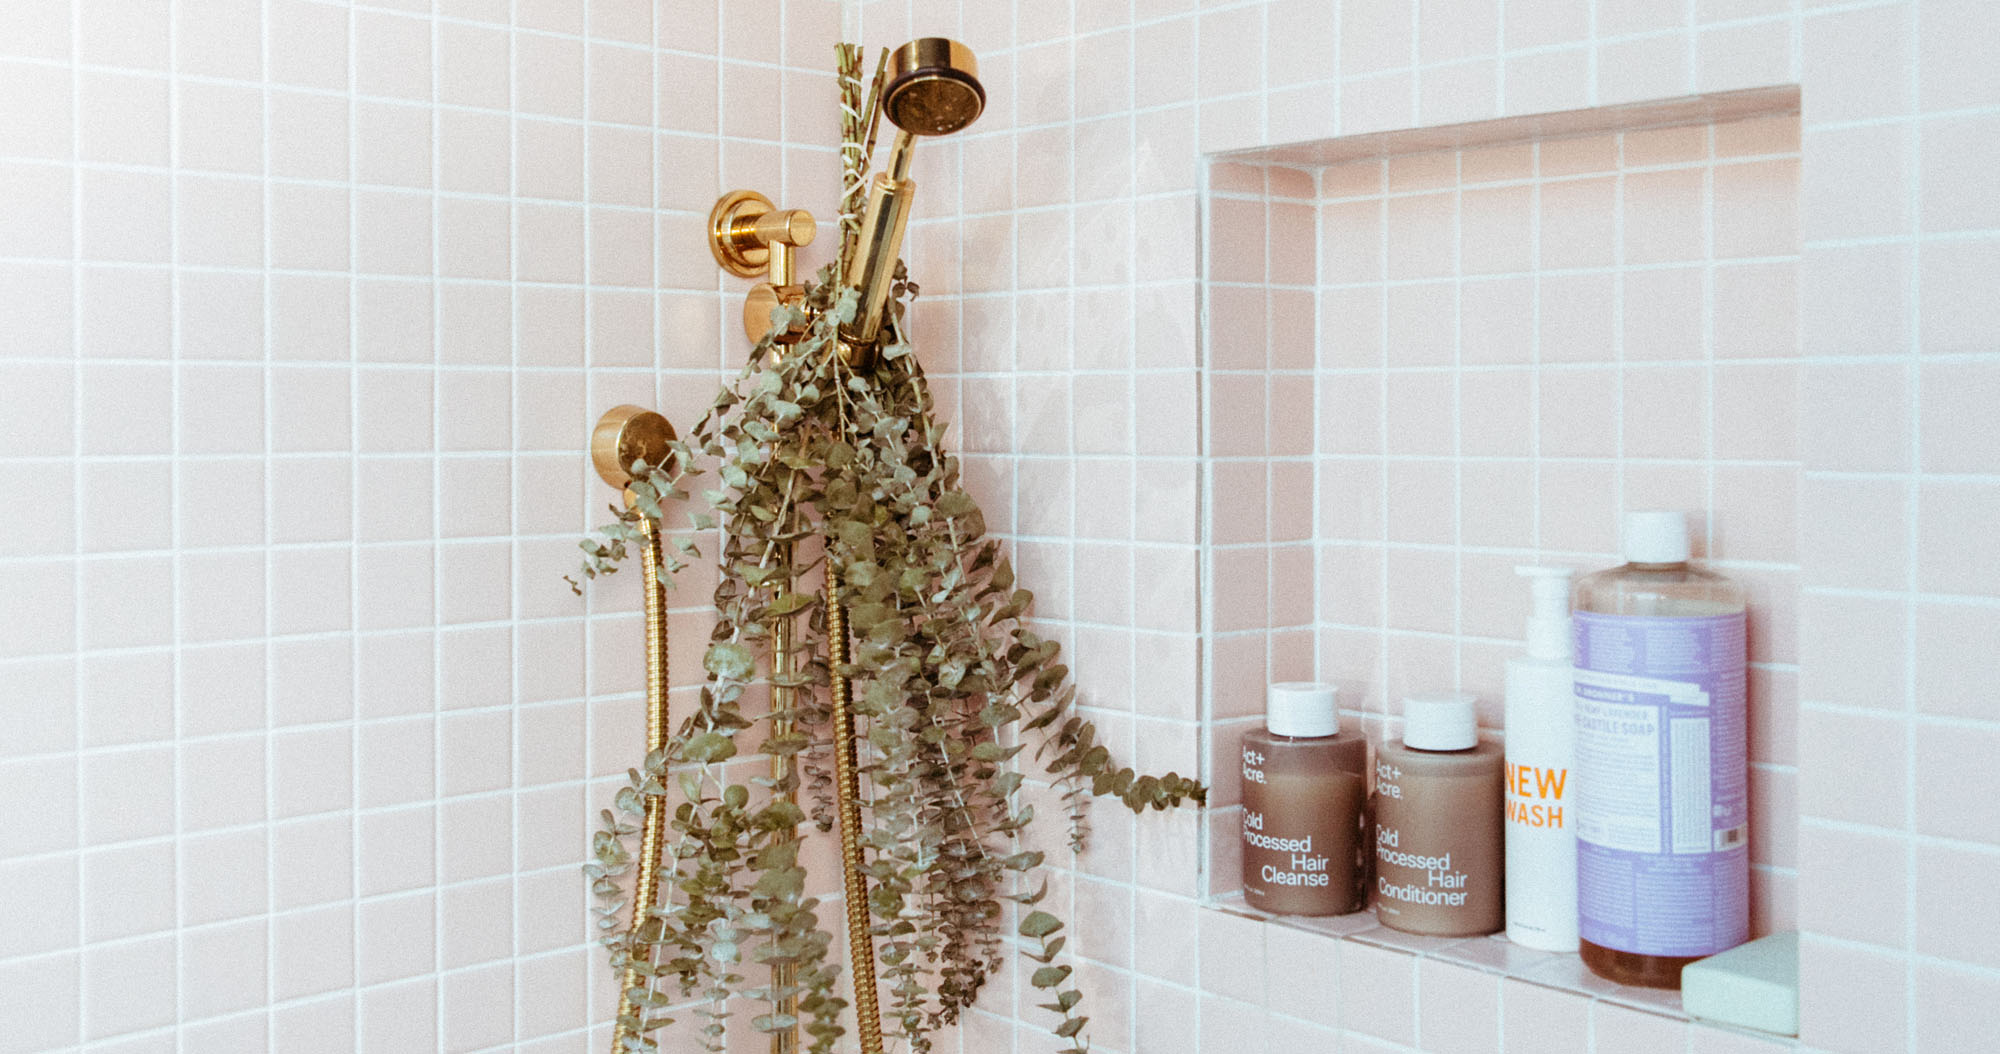 29 Of The Best Shower Products You Can Get On